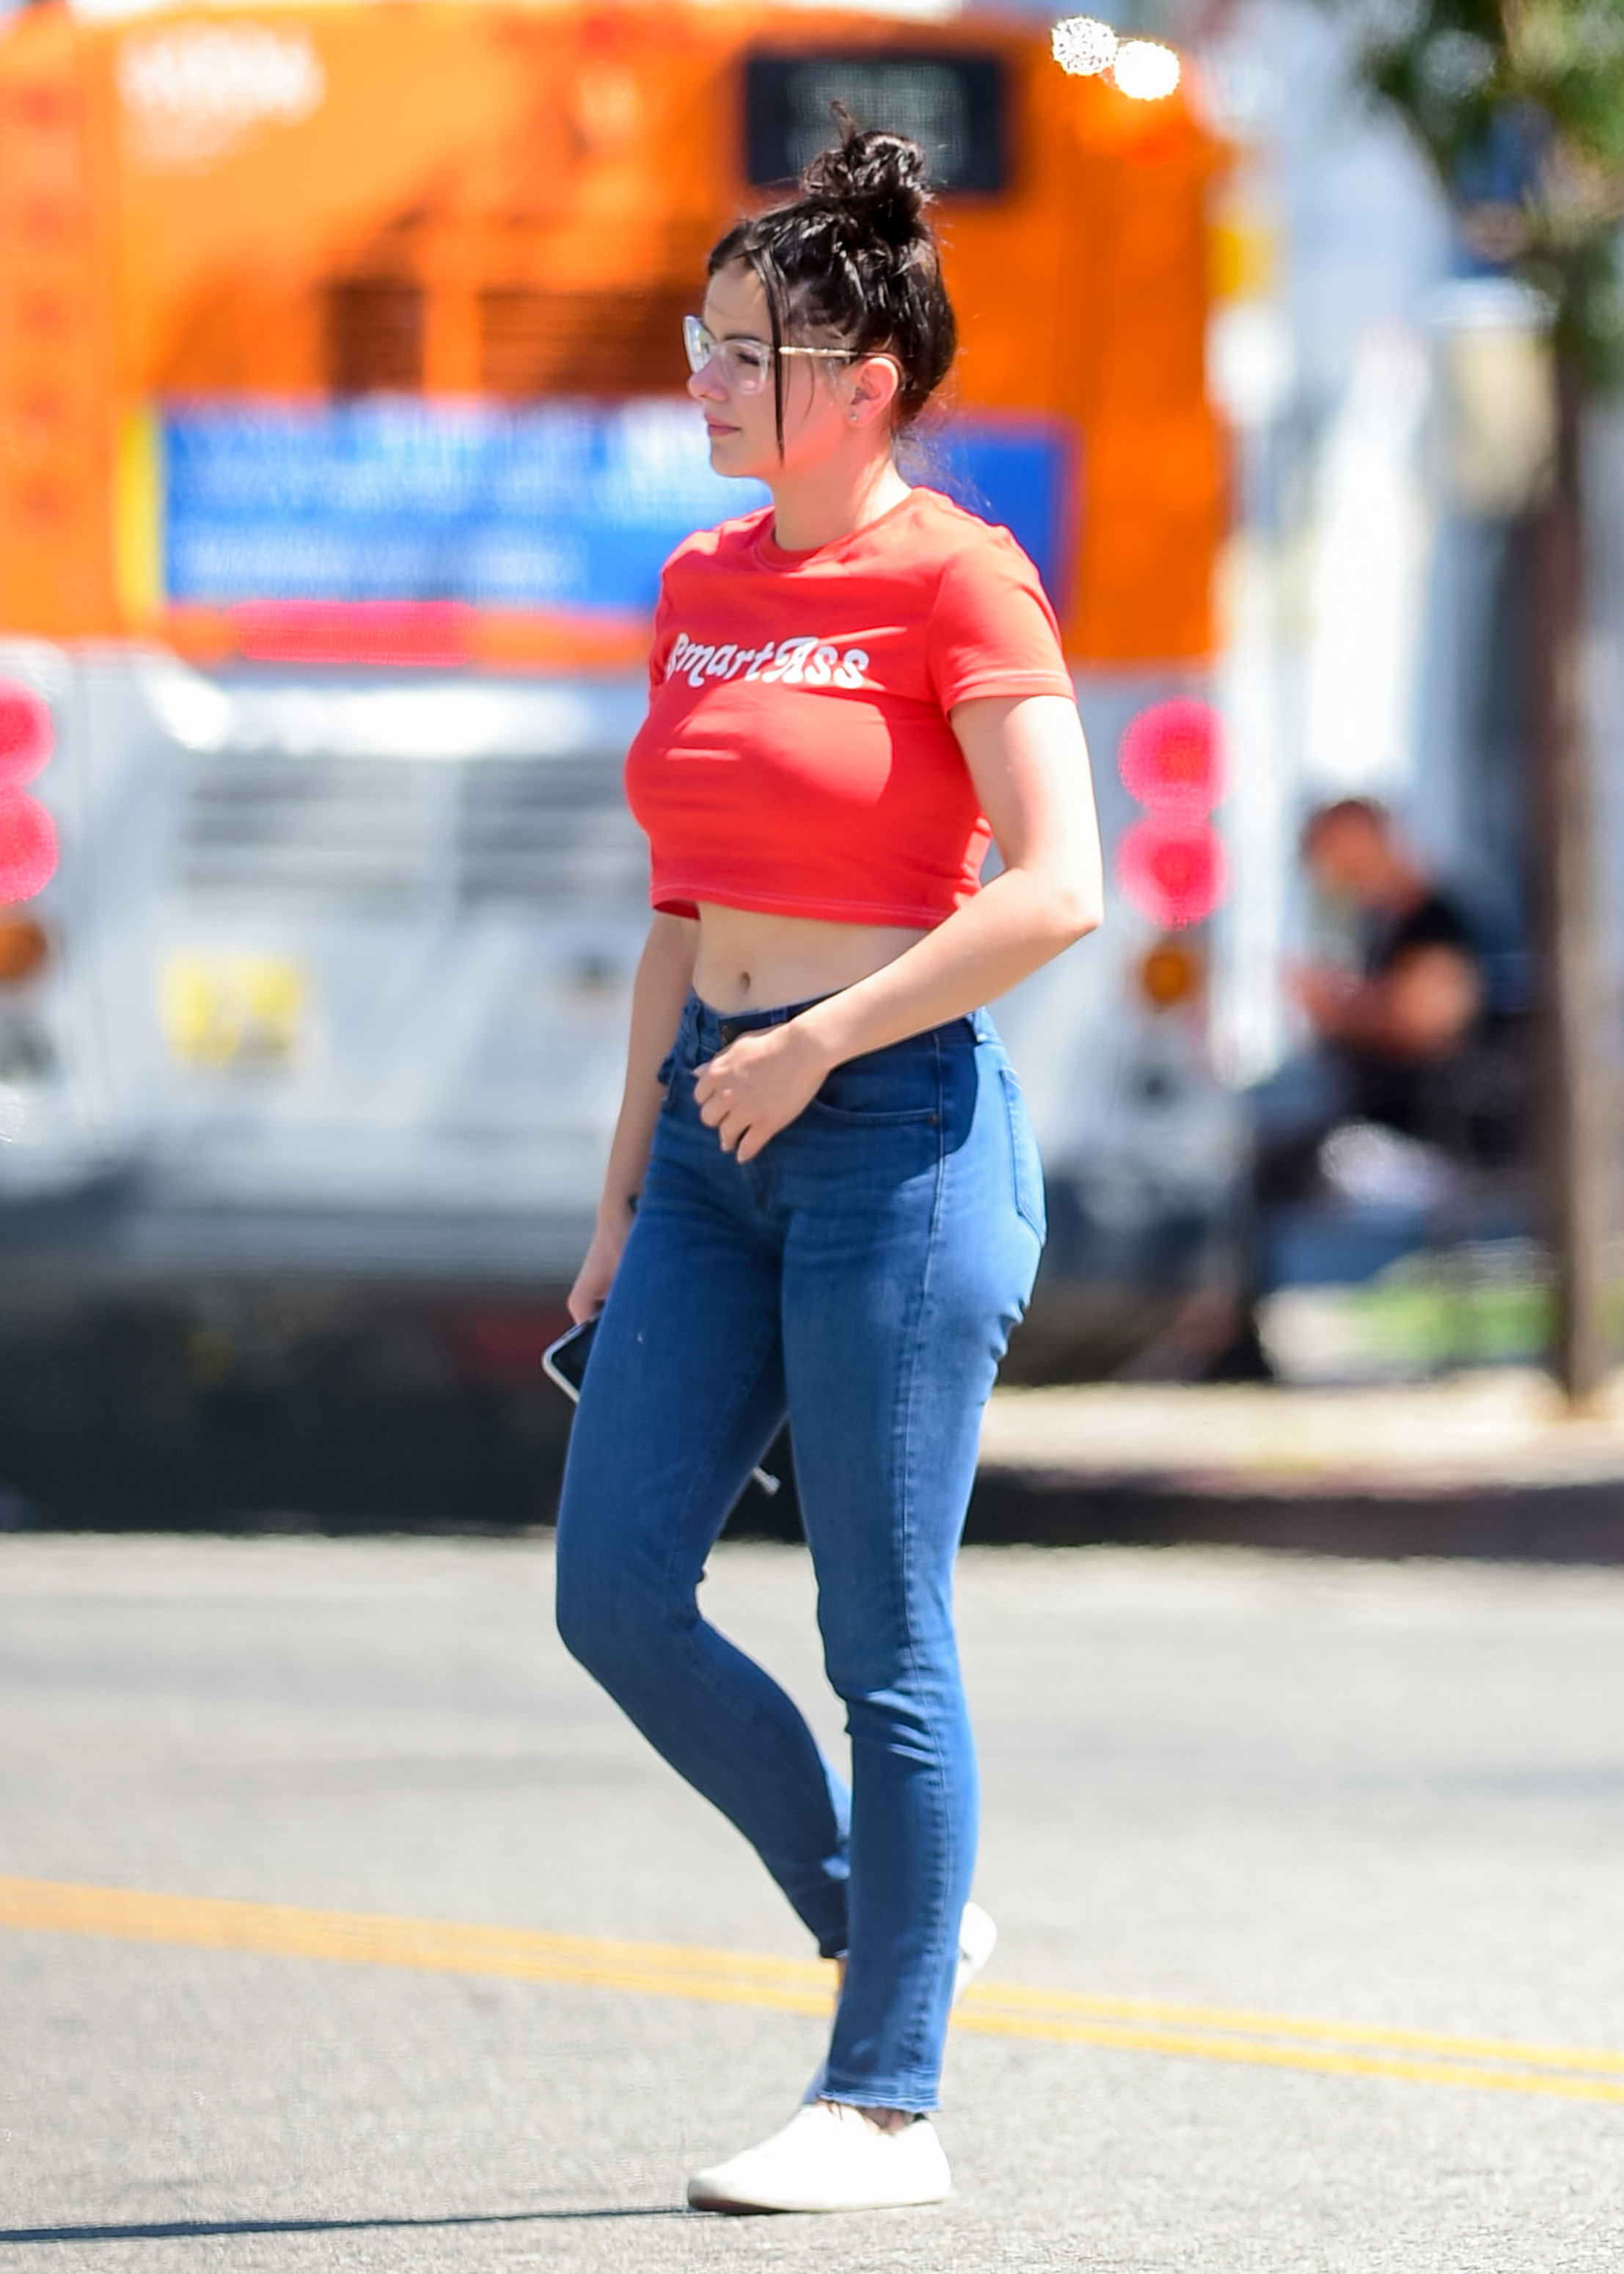 https://www.lifeandstylemag.com/wp-content/uploads/2019/08/Ariel-Winter-Crop-Top-Jeans-6.jpg?fit=800%2C1120&quality=86&strip=all